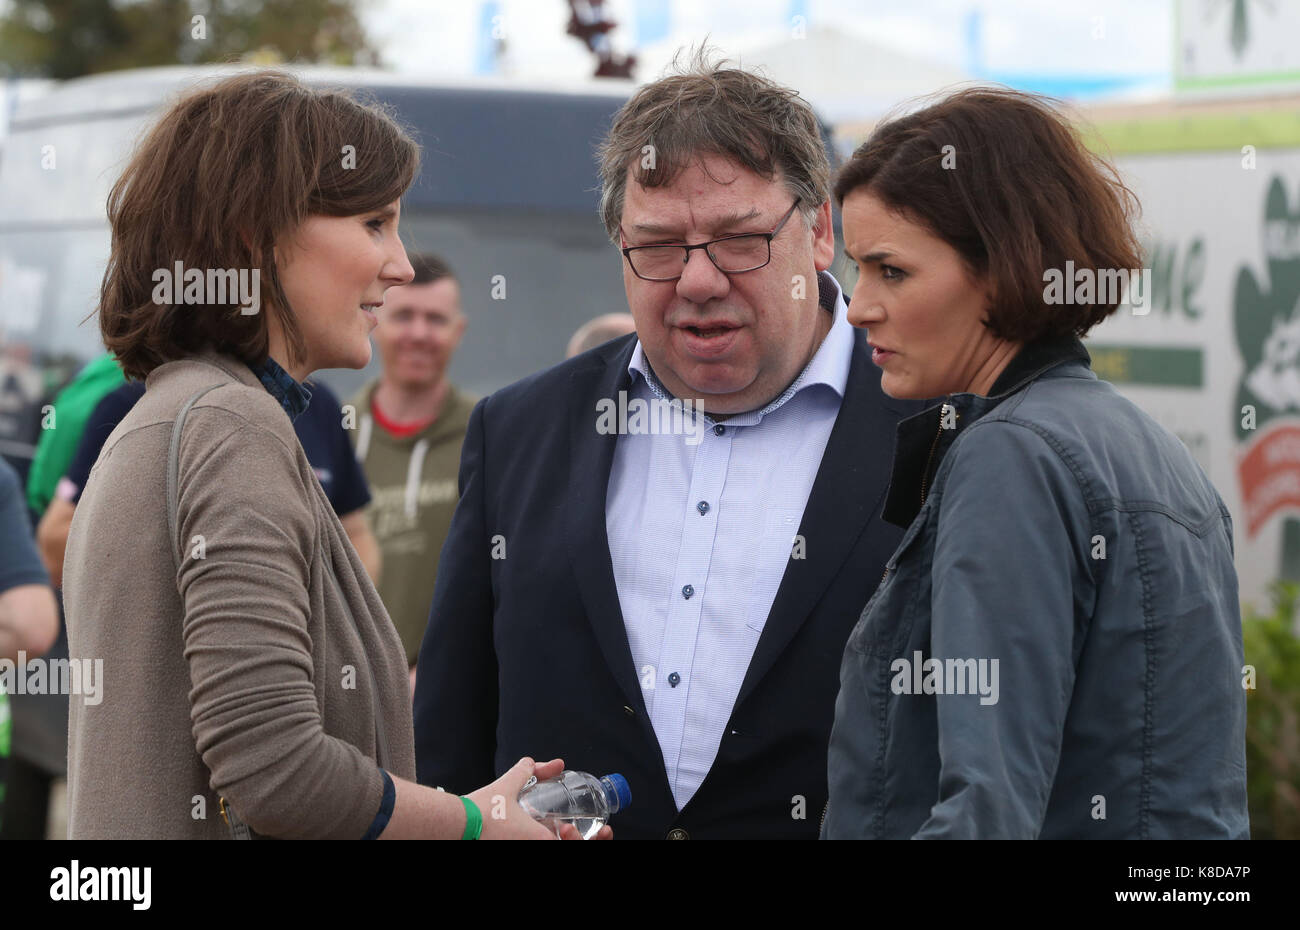 Former Taoiseach Brian Cowen chats with sisters Theresa Newman and Kate O'Connell of Fine Gael at the National Ploughing Championships in Tullamore Co Offaly. Stock Photo